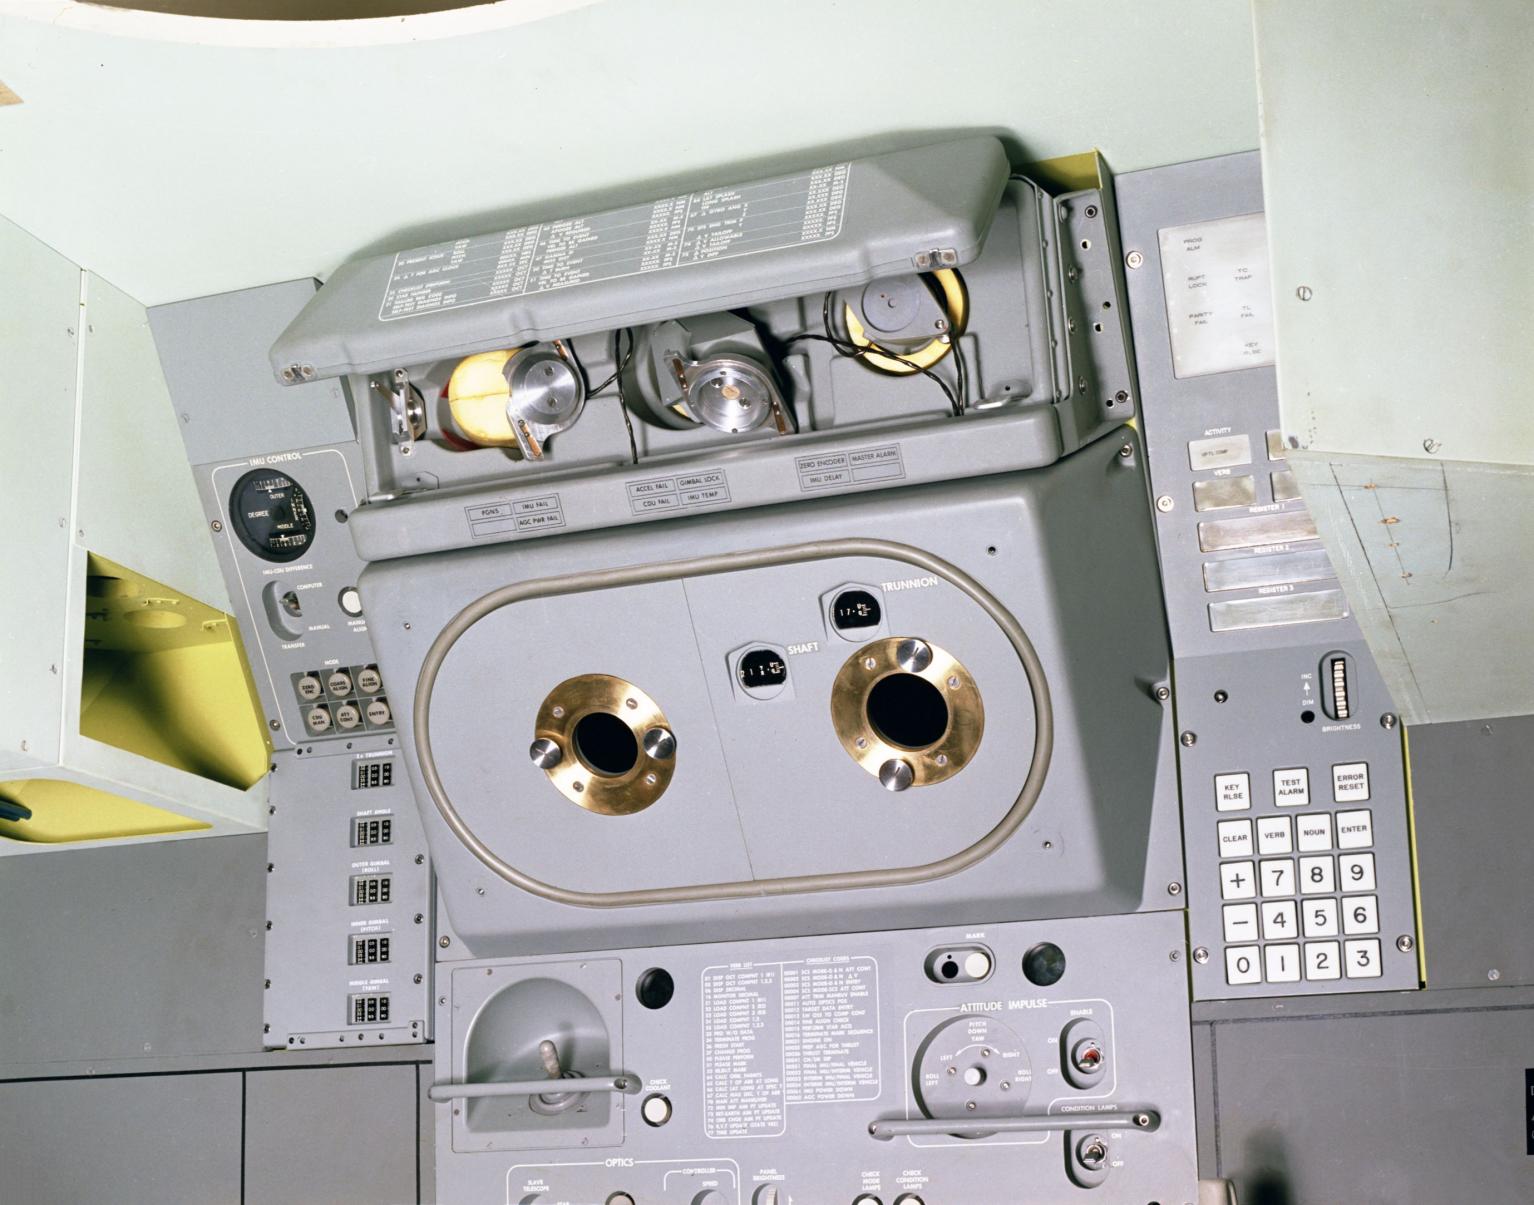 Mock-Up of the Apollo Primary Guidance, Navigation, and Control System